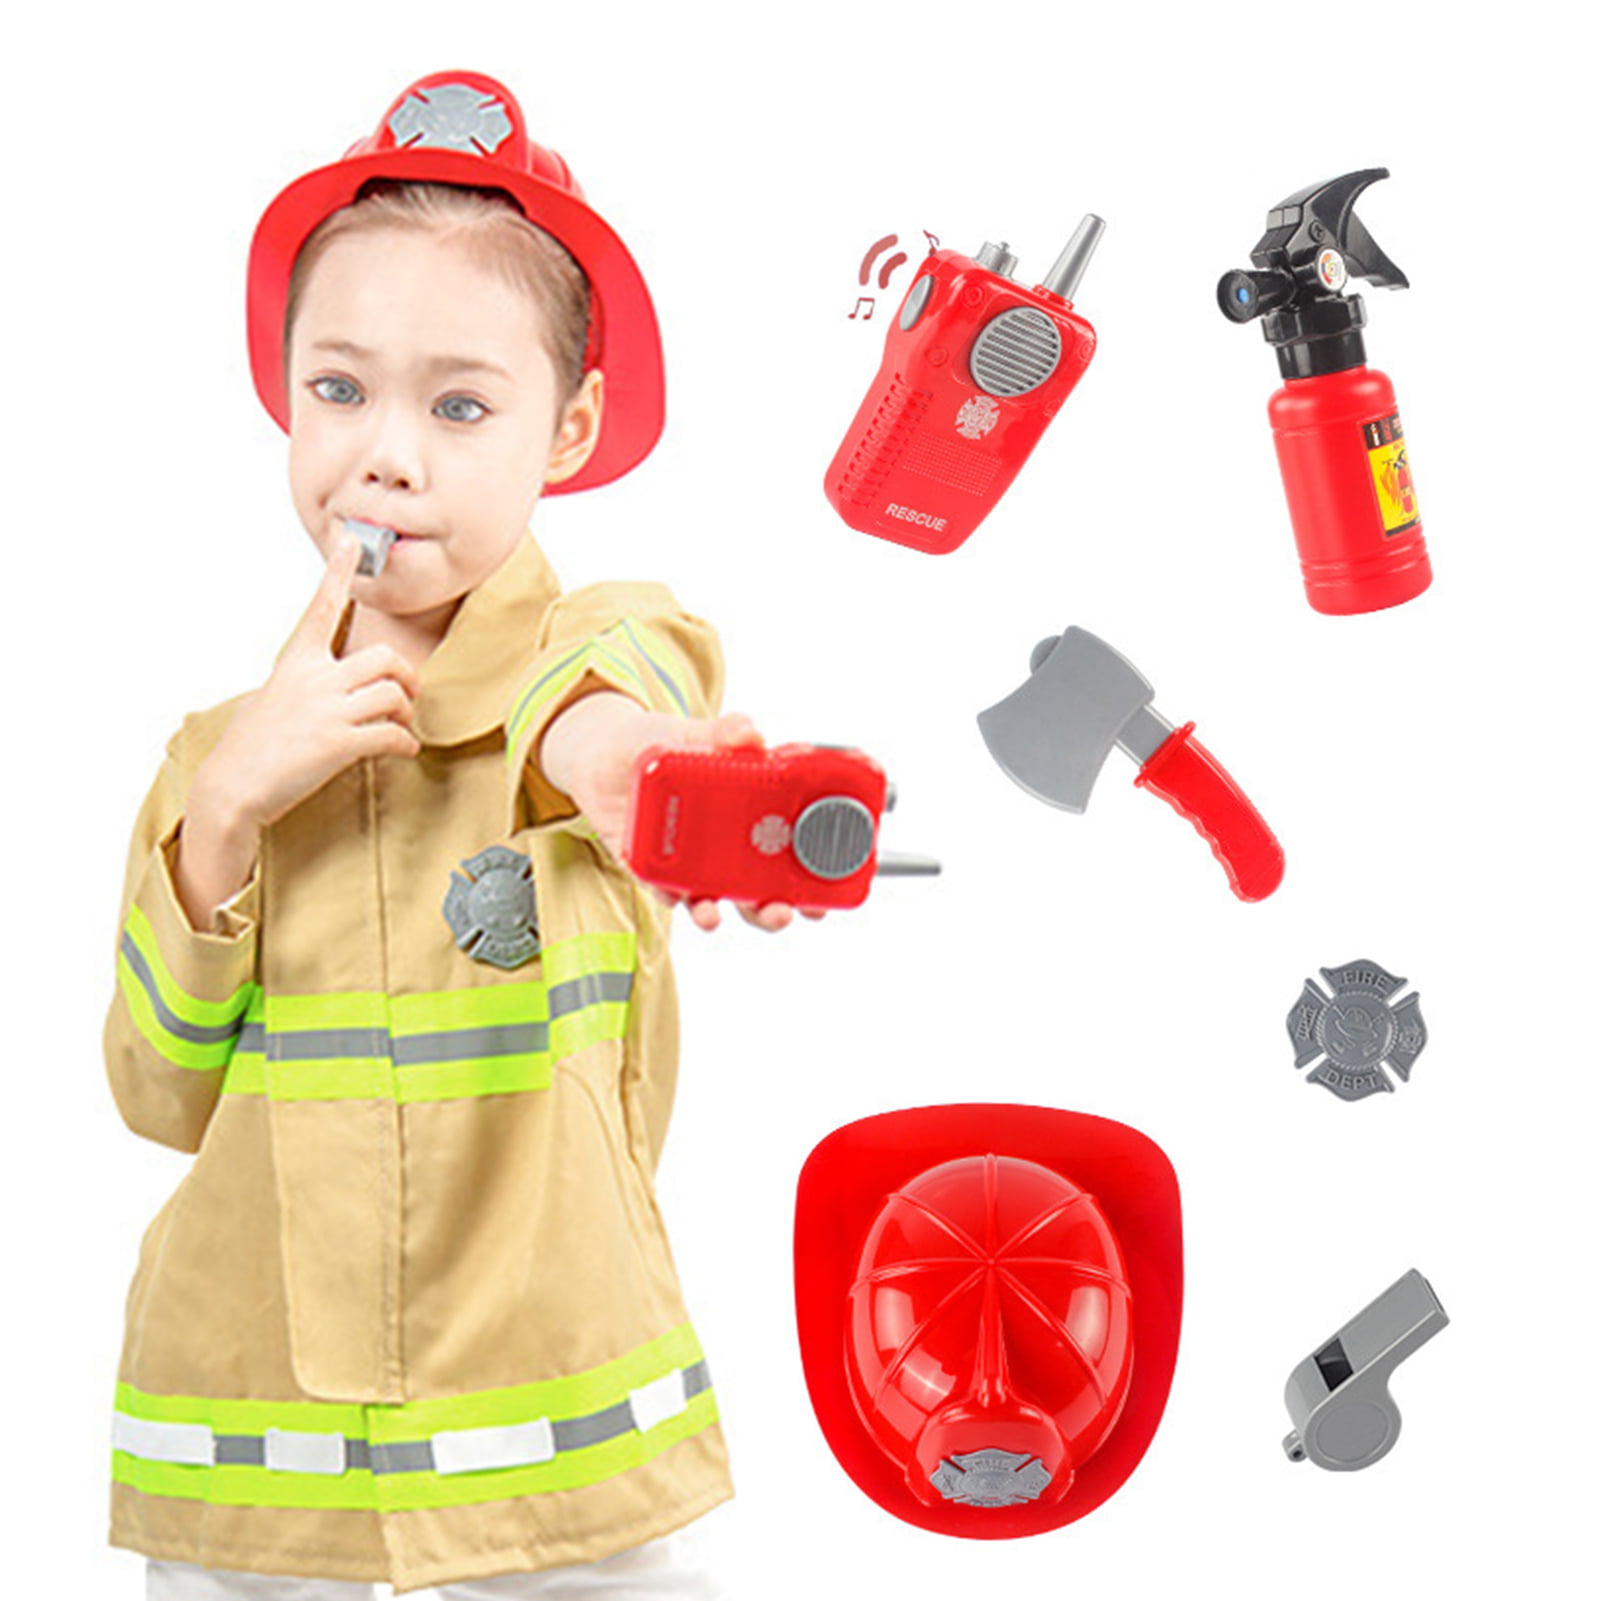 Details about   NEW 2 PIECE RED FIREMAN COSTUME SIZE 2T 